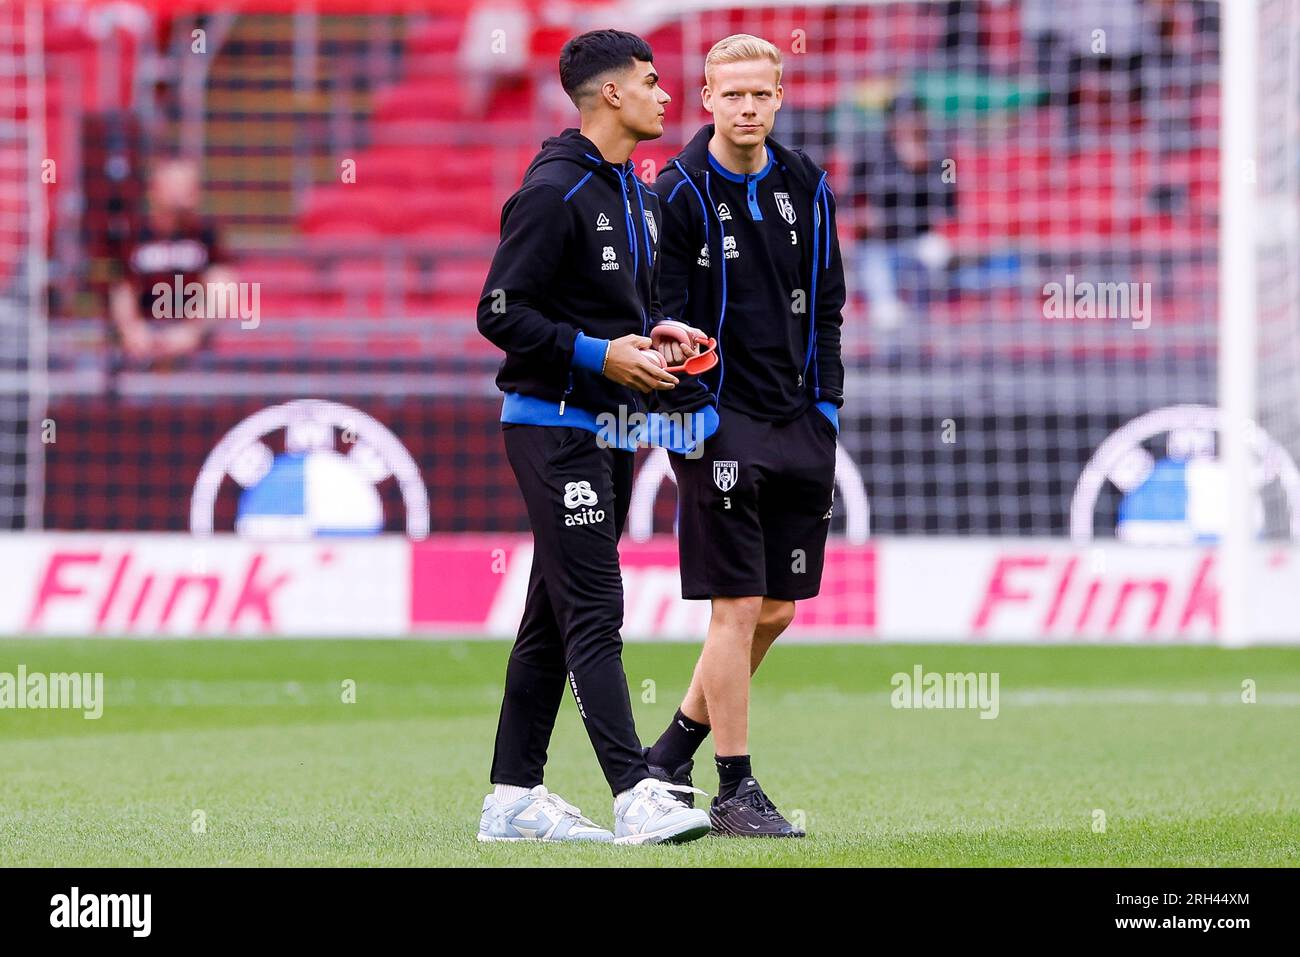 AMSTERDAM, NETHERLANDS - AUGUST 12: Antonio Satriano (Heracles Almelo) and Jannes Wieckhoff (Heracles Almelo) during the Eredivisie match of AFC Ajax Stock Photo